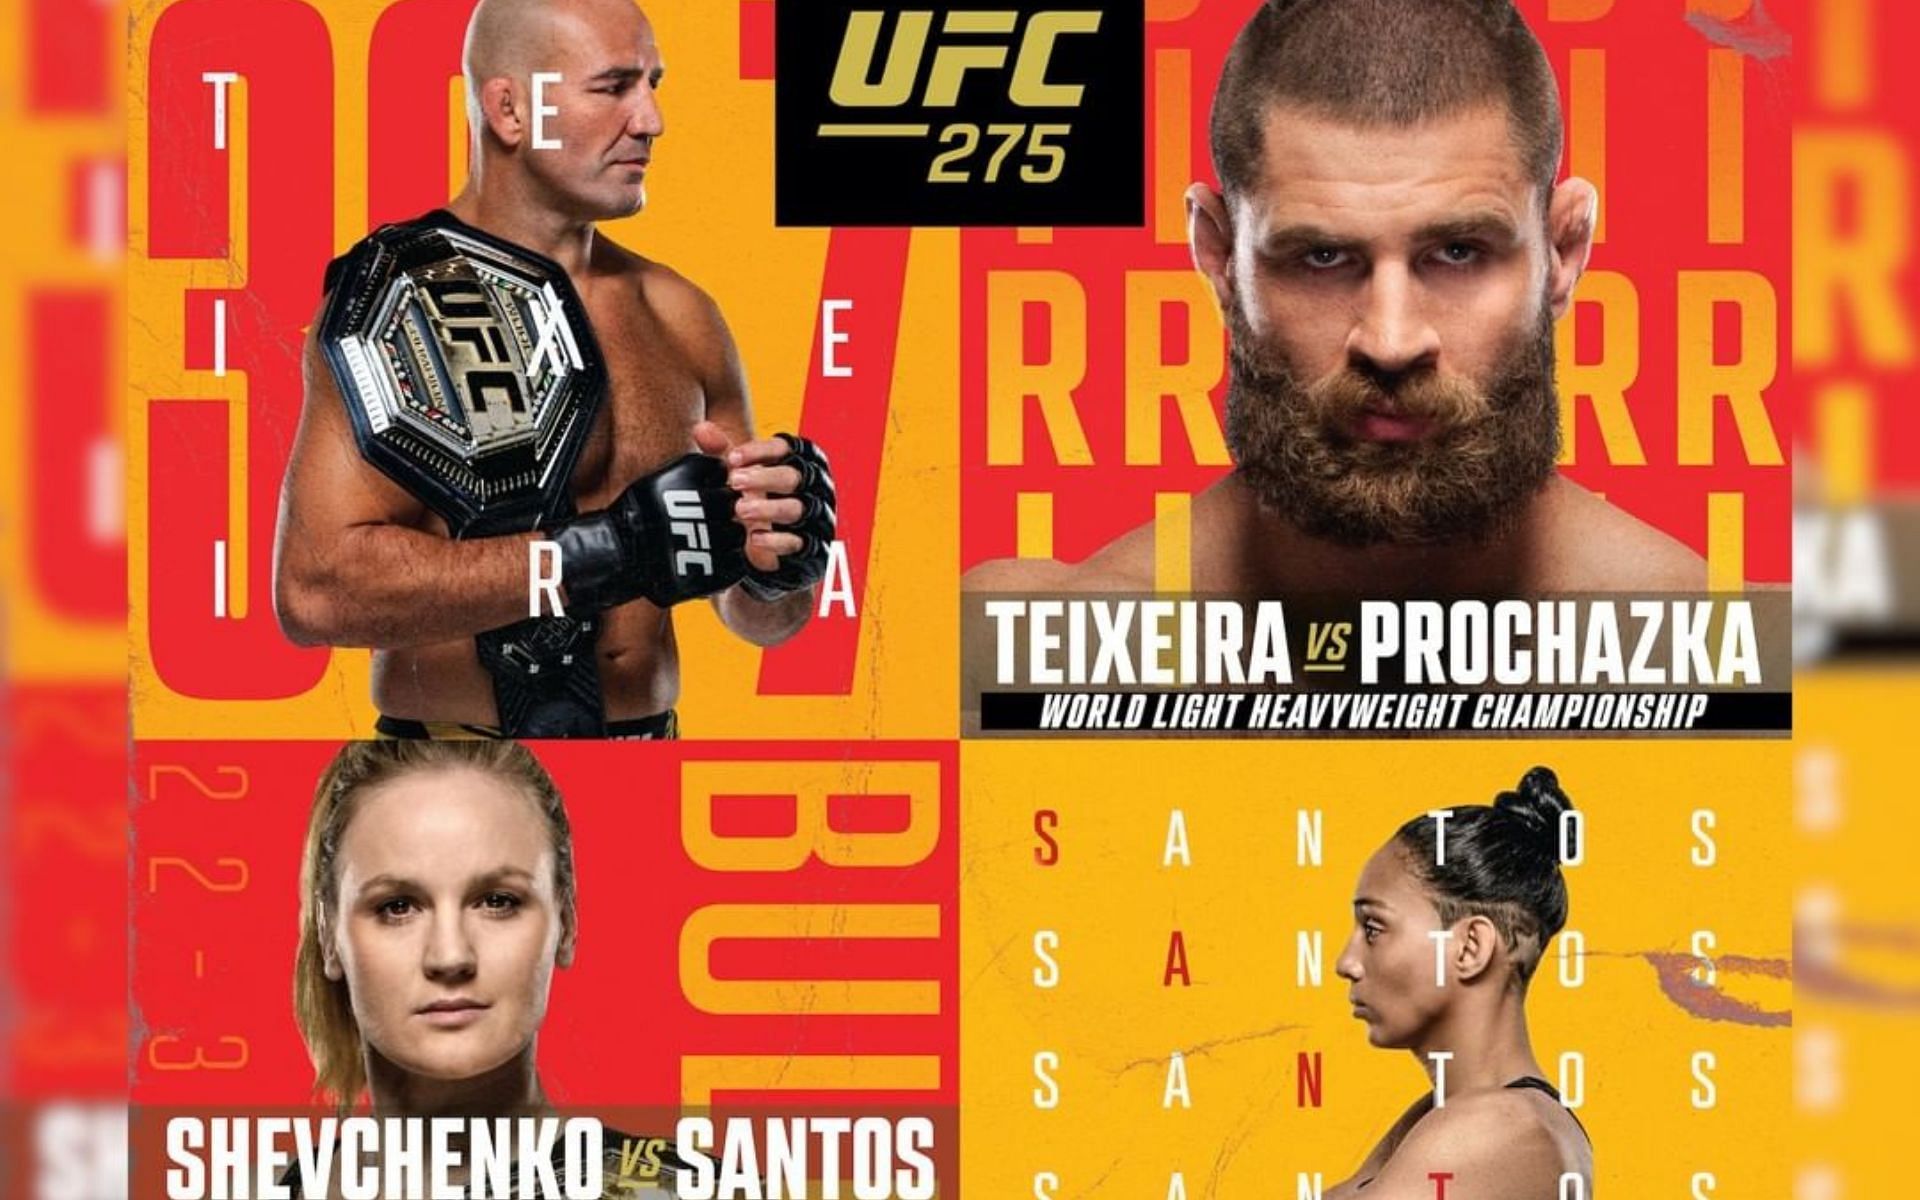 Official poster of the event featuring the fighters (Image courtesy @ufc Instagram)